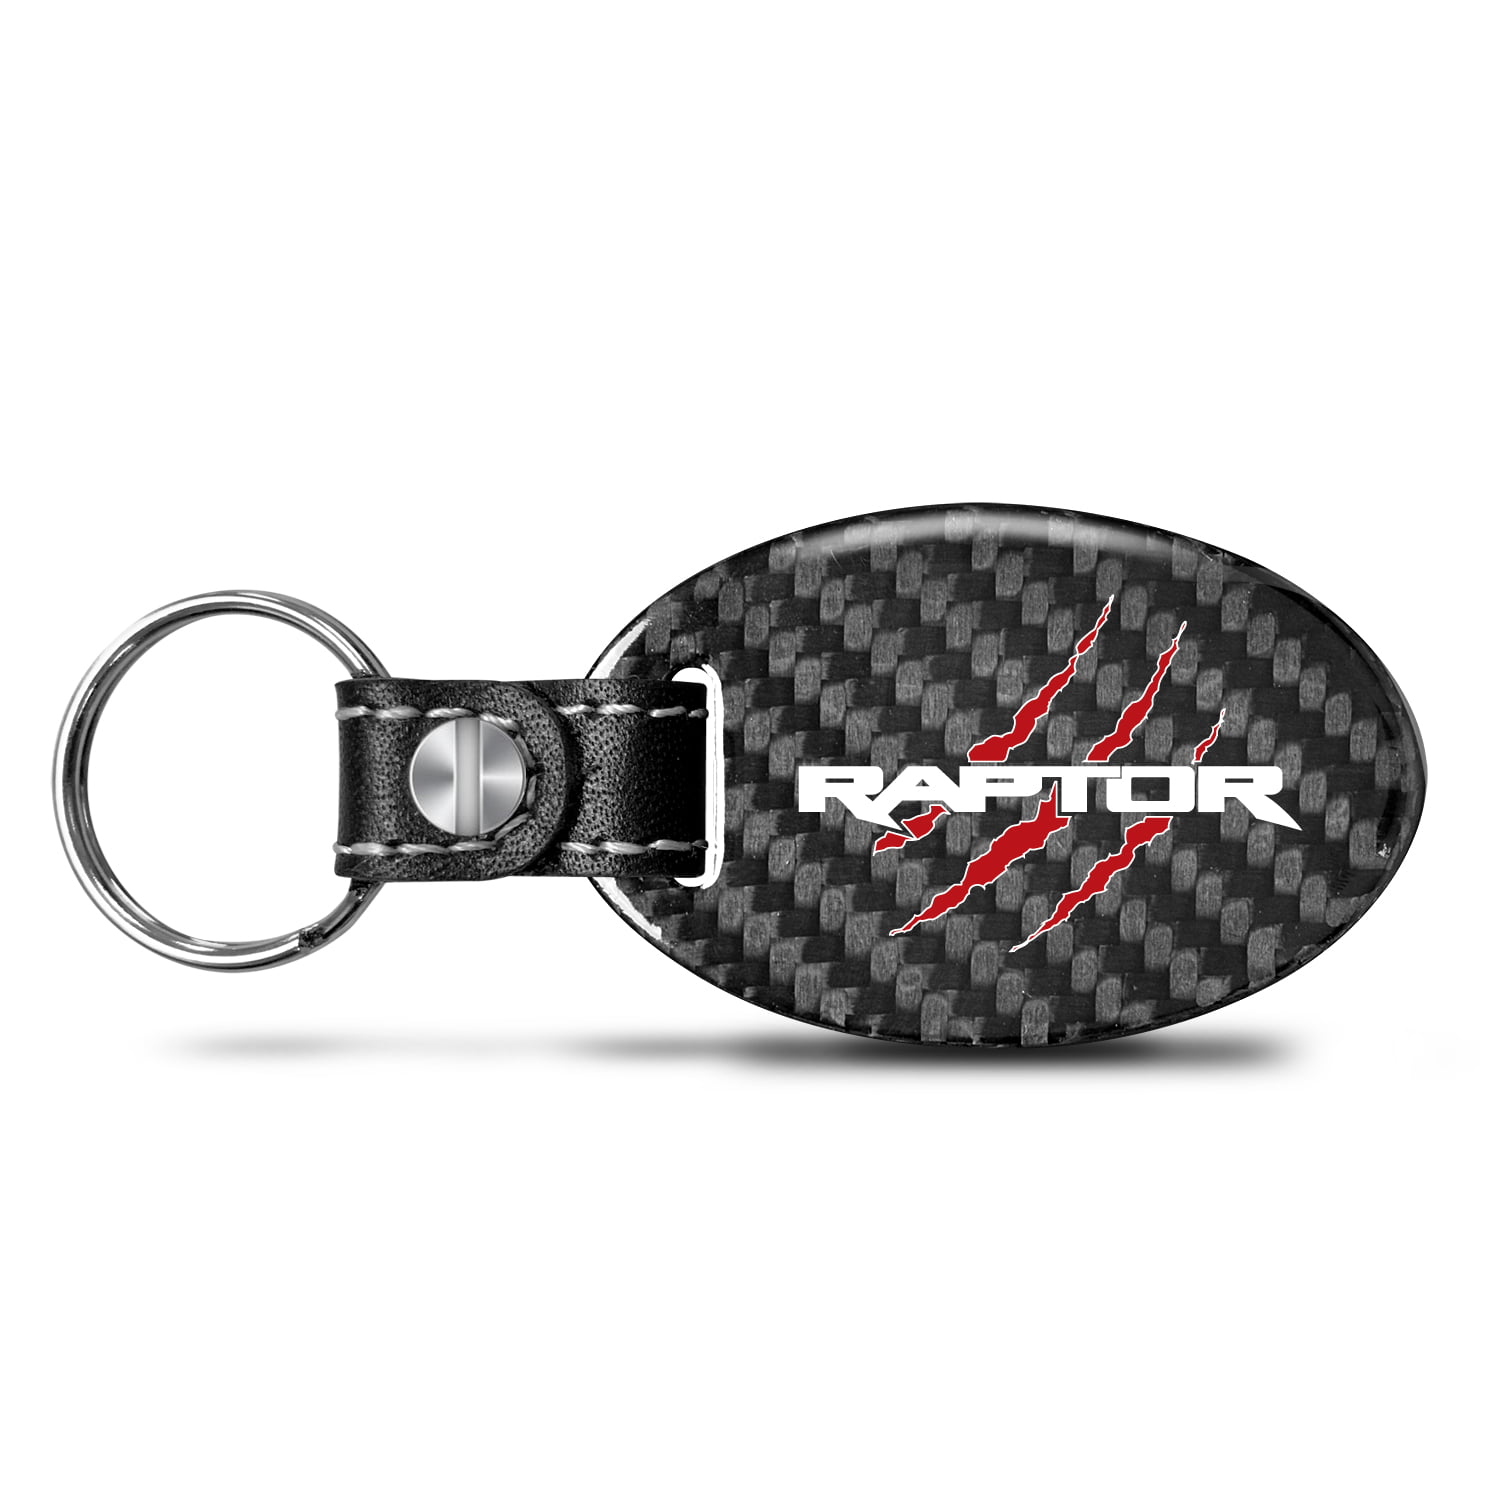 iPick Image Lincoln MKZ Real Carbon Fiber Strap Key Chain with Red stitching 